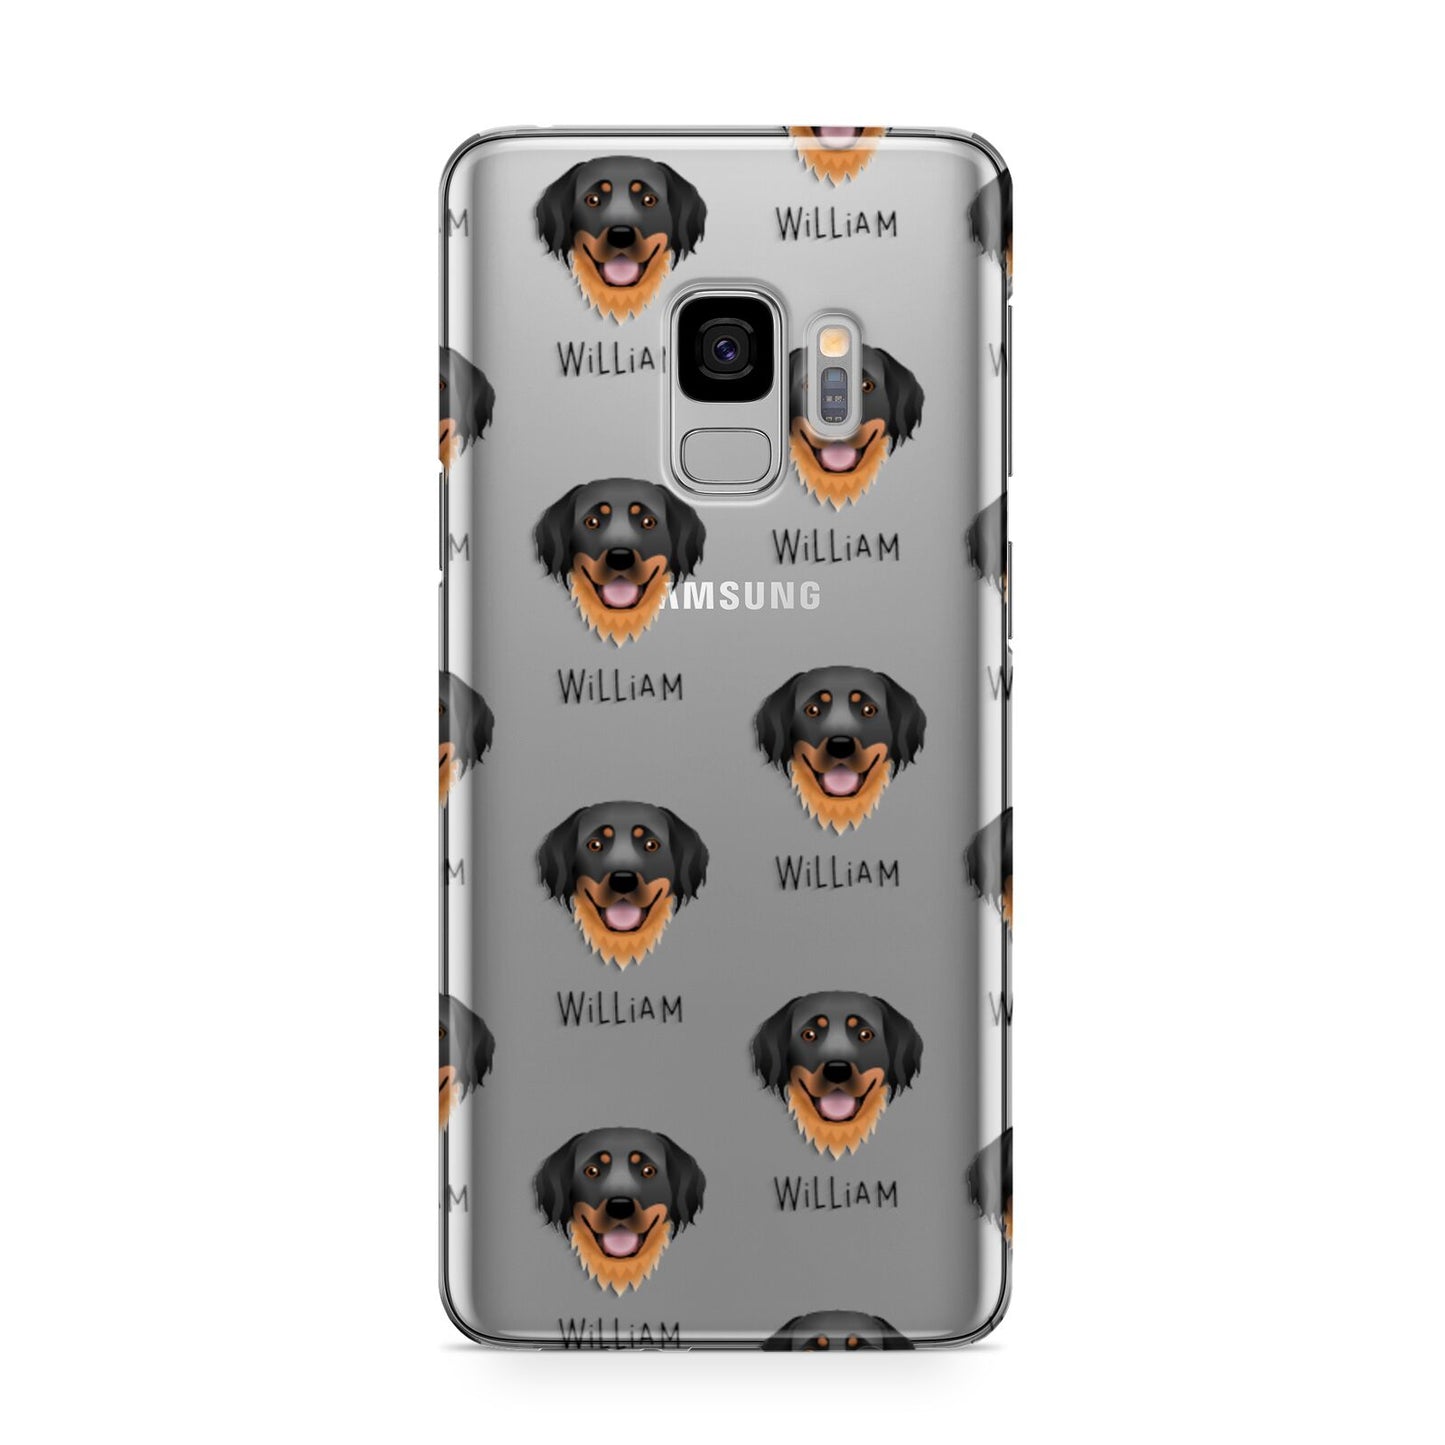 Hovawart Icon with Name Samsung Galaxy S9 Case